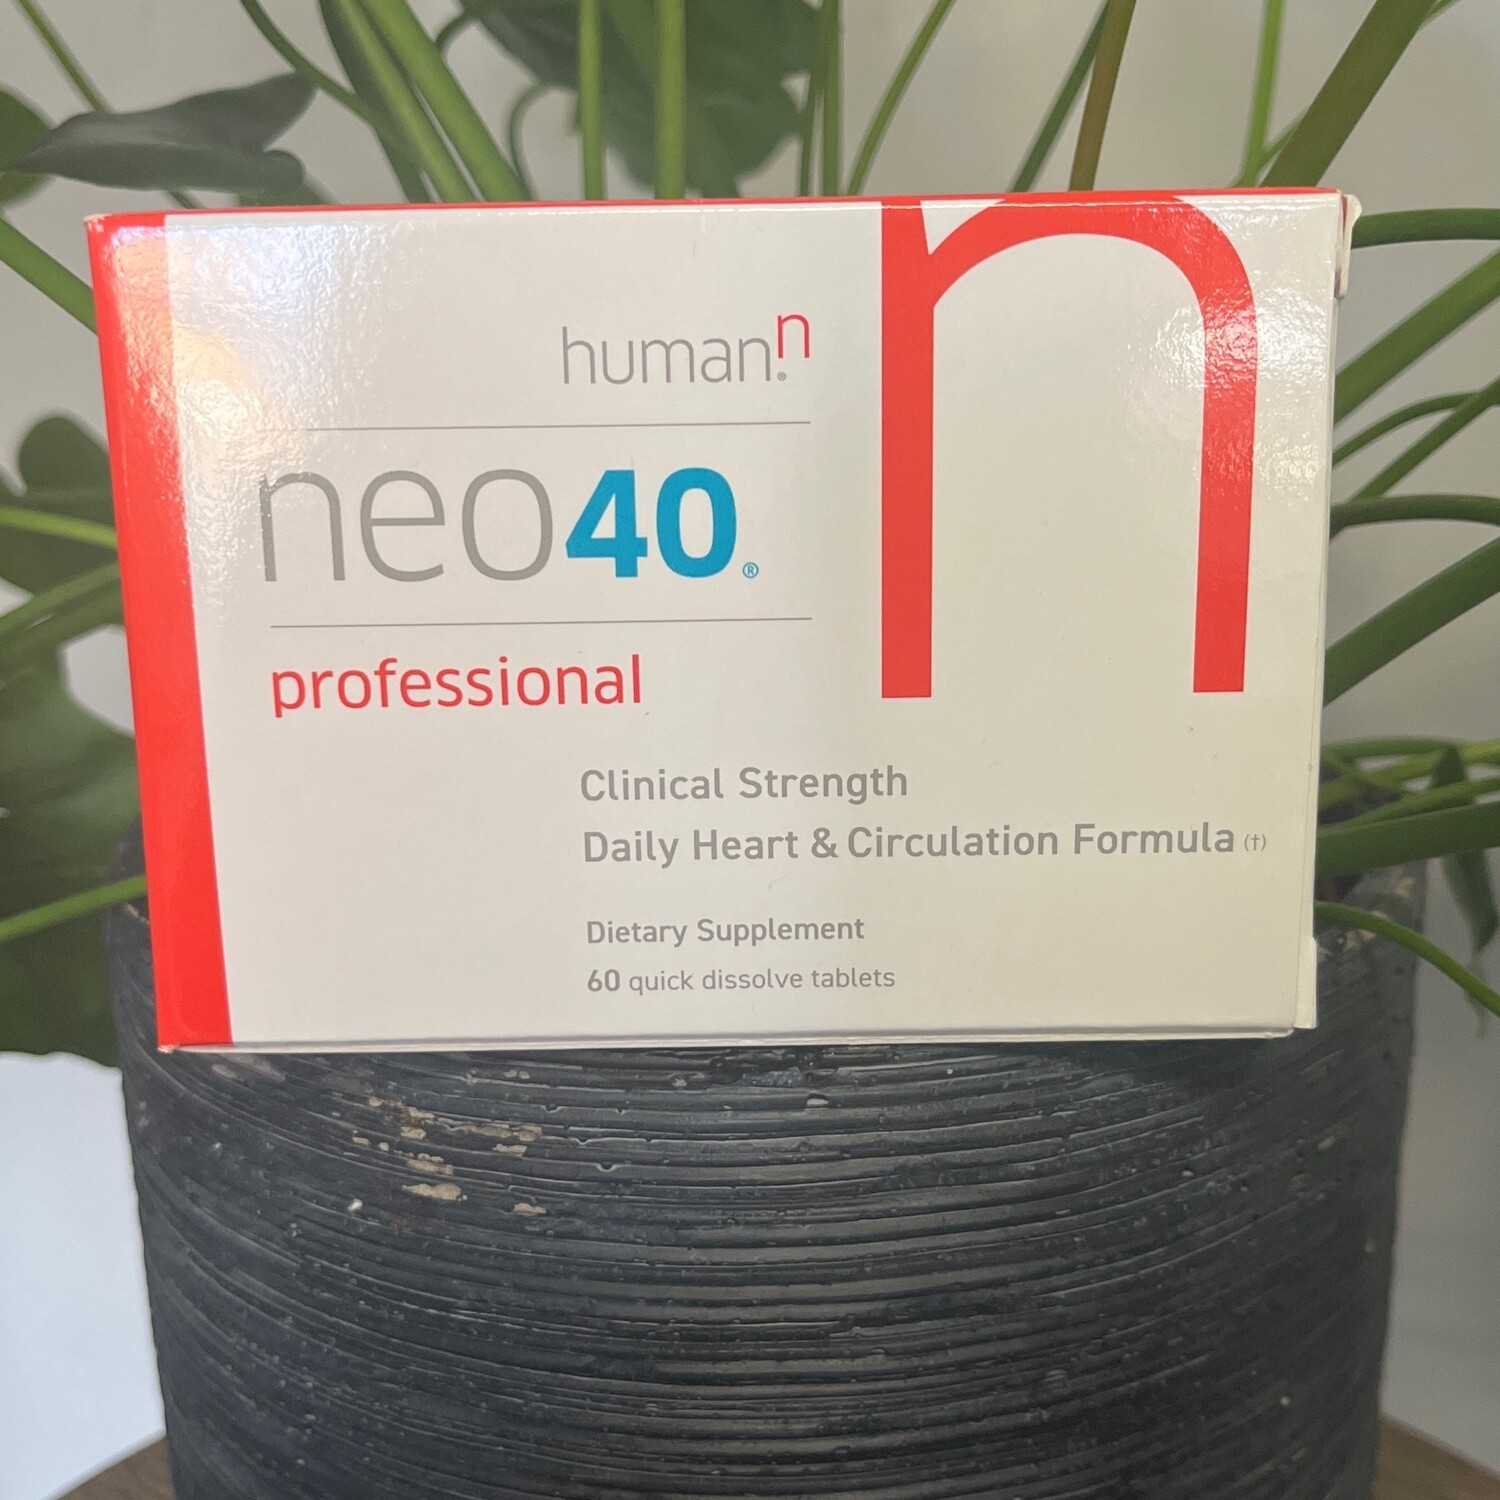 NEO 40 Professional 60 Tablets